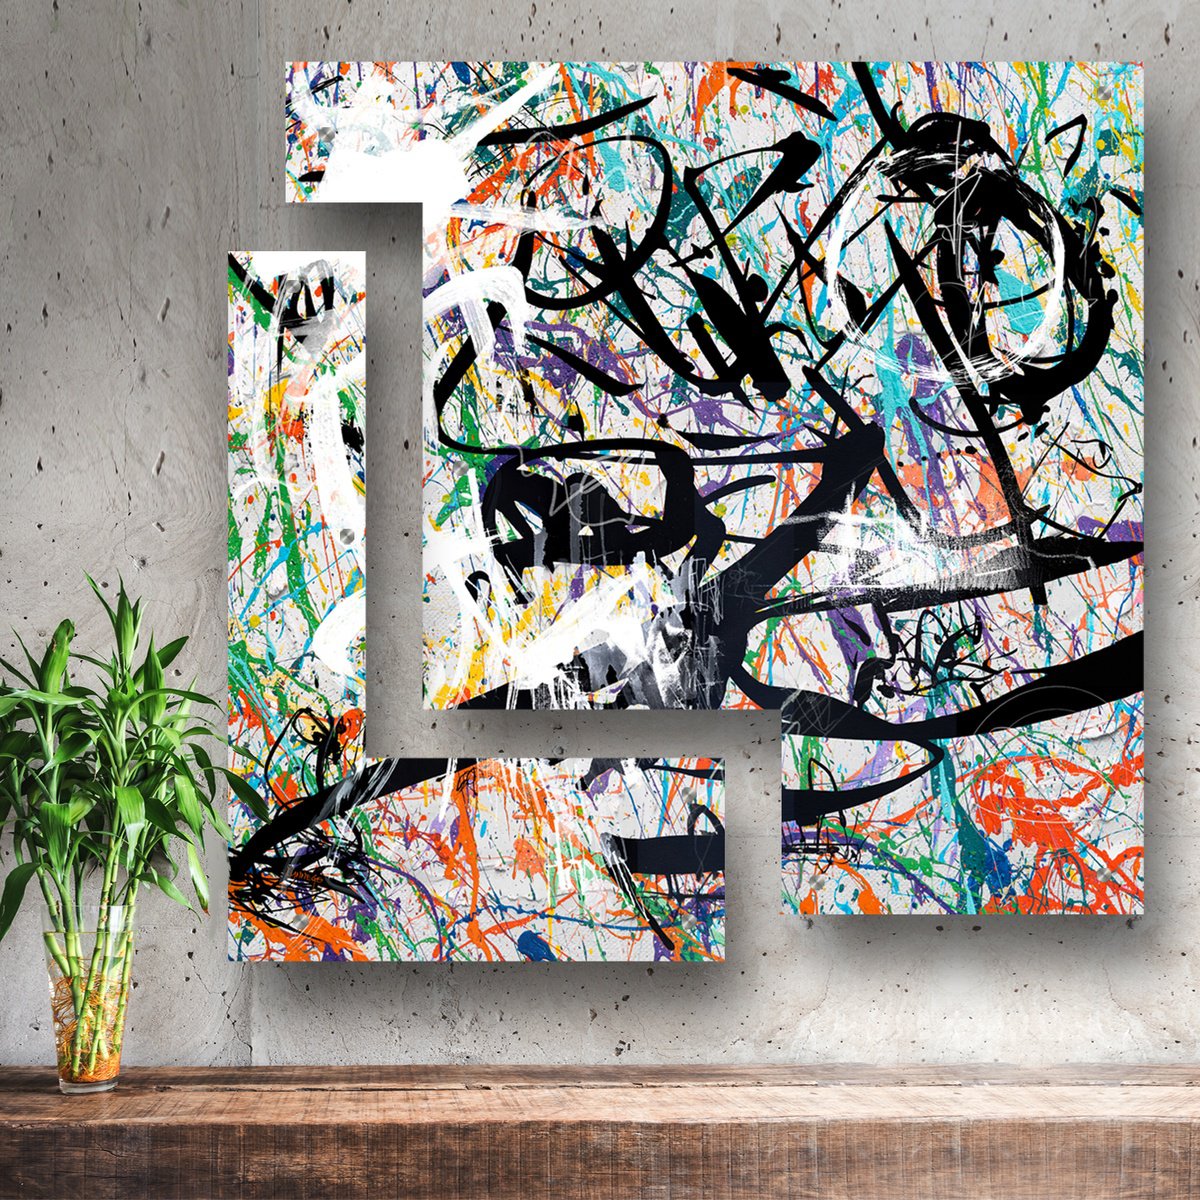 Call Me Crazy - Diptych by Lynne Godina-Orme